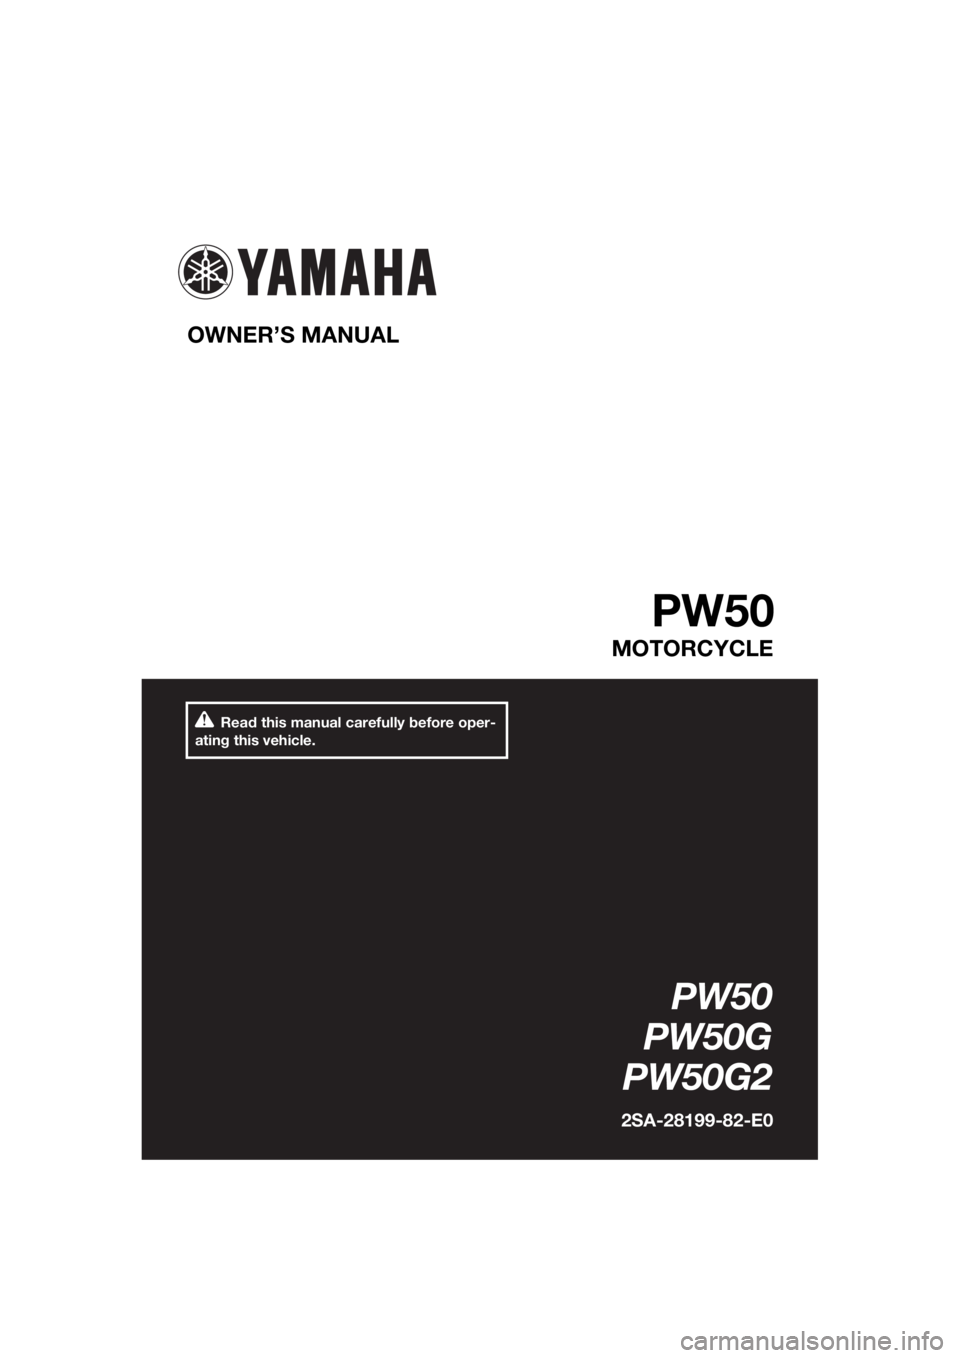 YAMAHA PW50 2016  Owners Manual Read this manual carefully before oper-
ating this vehicle.
OWNER’S MANUAL 
PW50
MOTORCYCLE
PW50
PW50G
PW50G2
2SA-28199-82-E0
U2SA82E0.book  Page 1  Monday, June 8, 2015  1:09 PM 